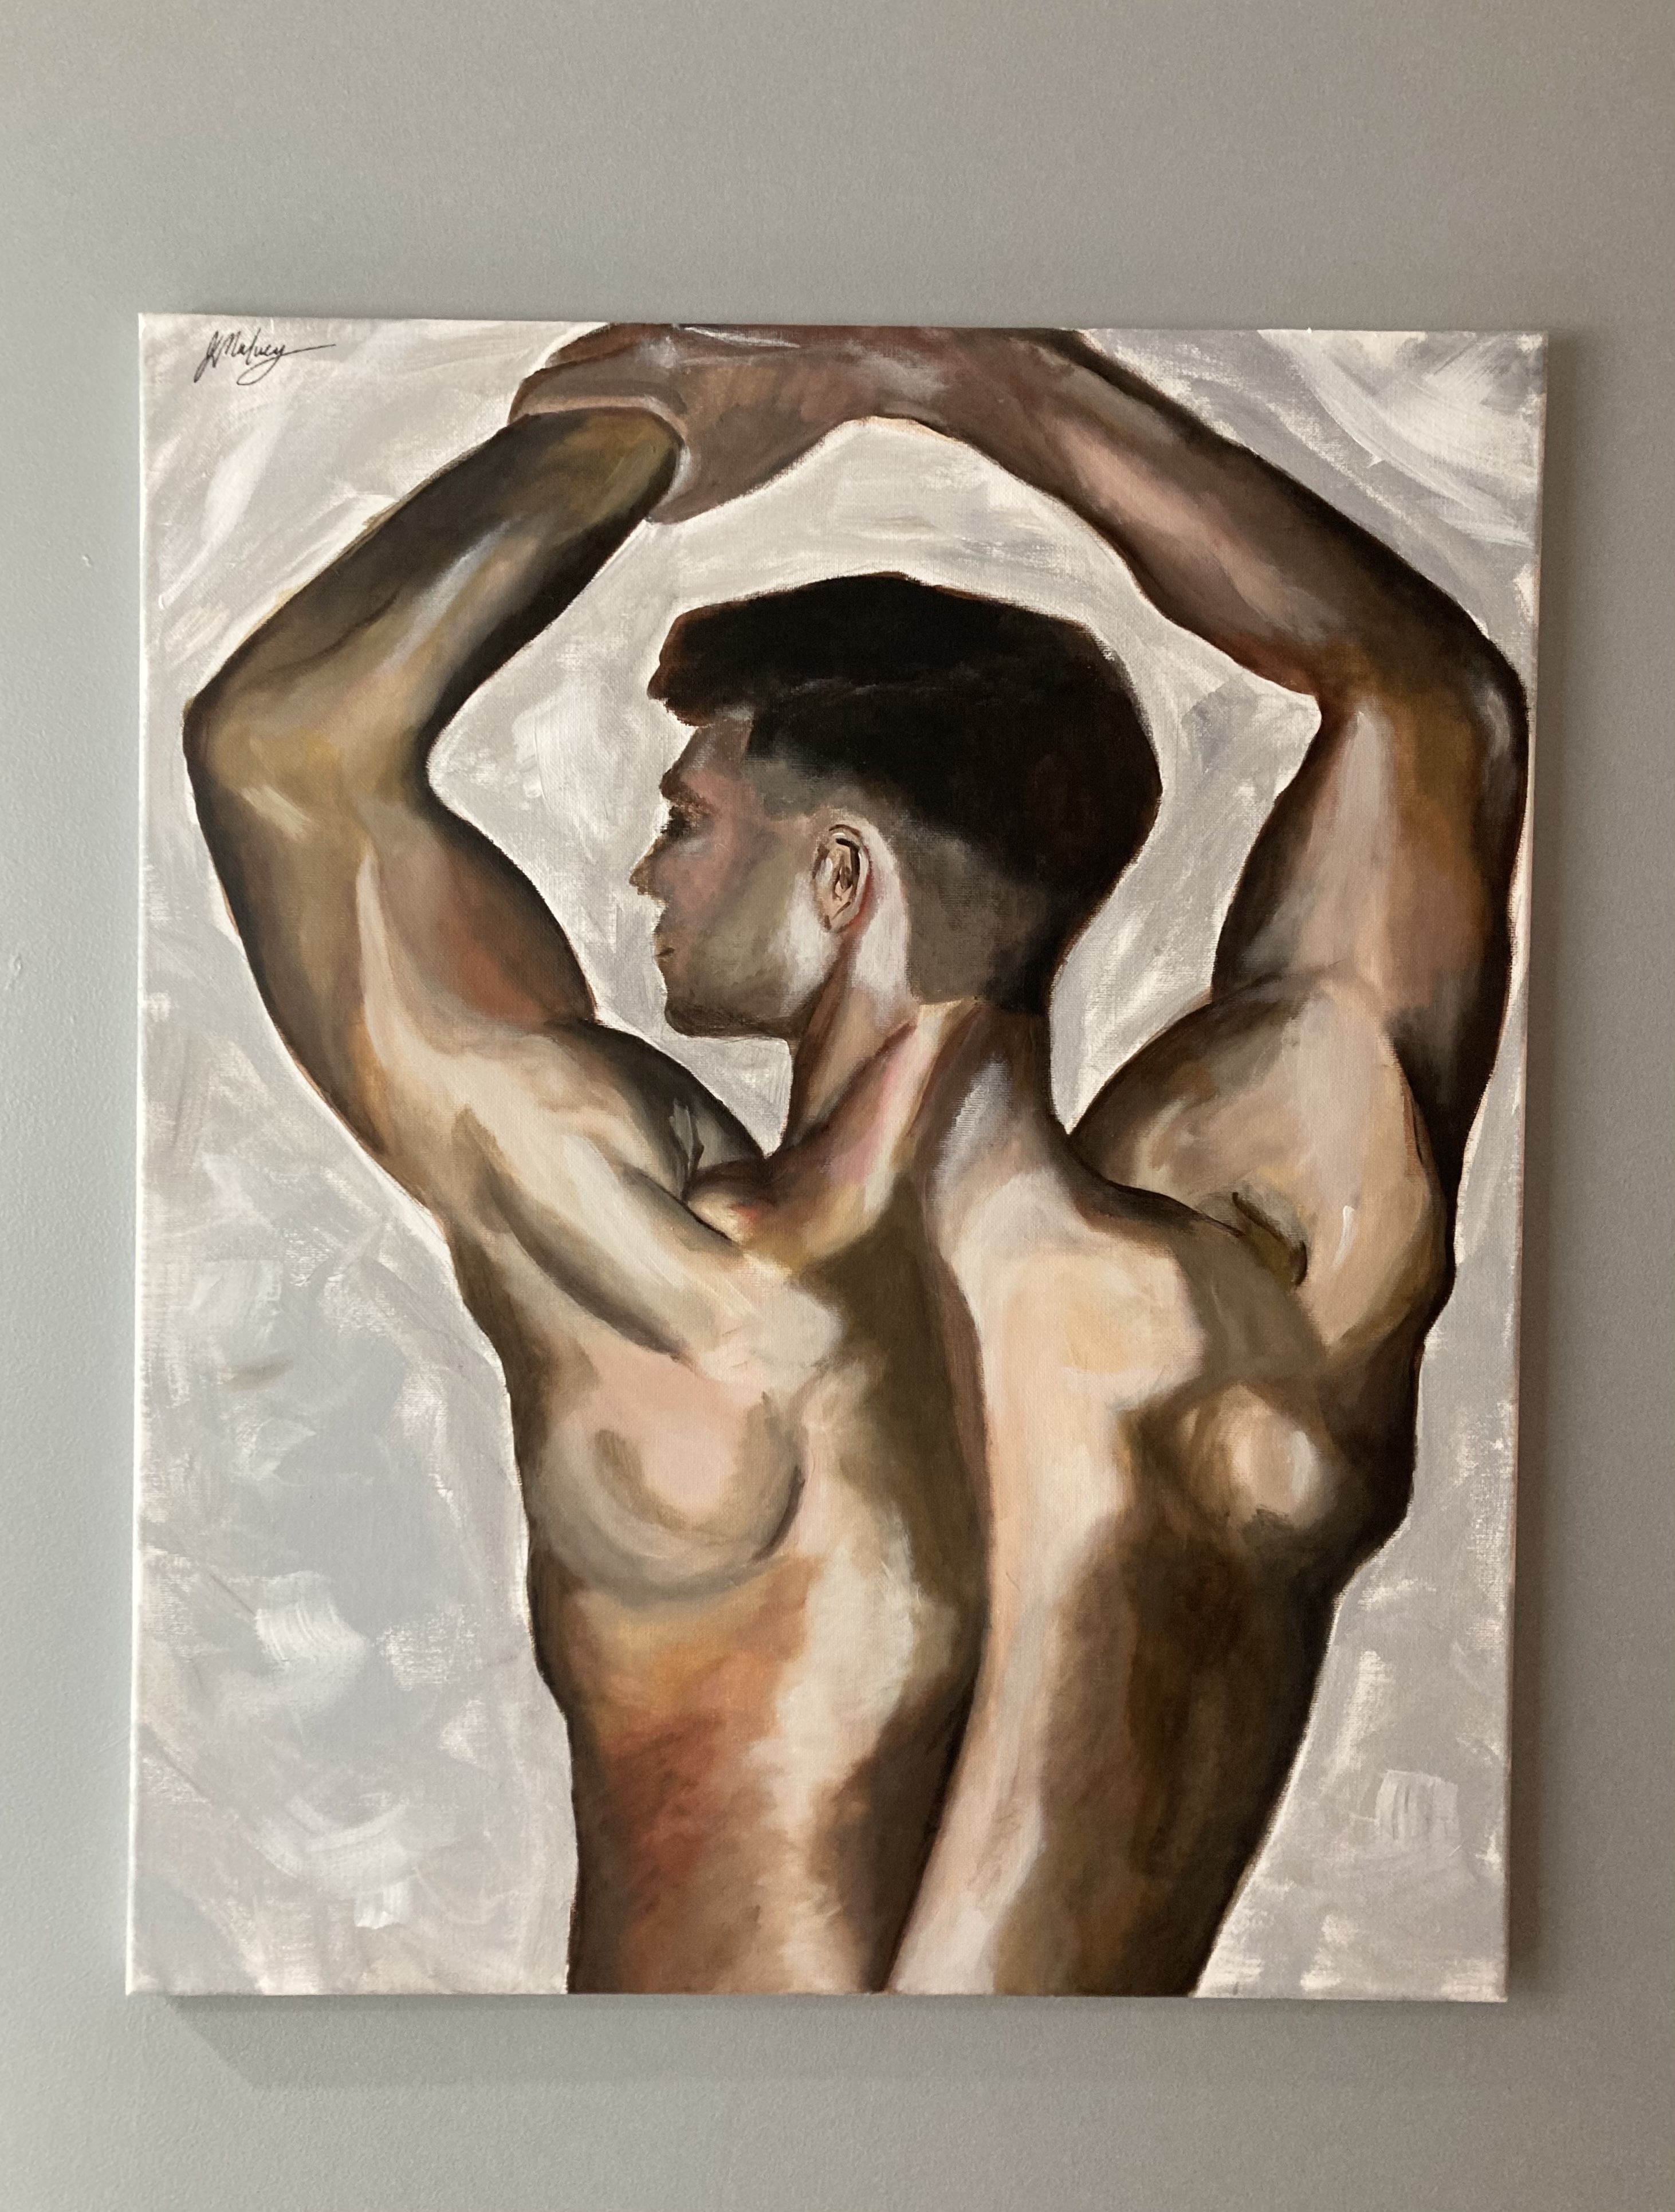 Acrylic canvas studying the human form